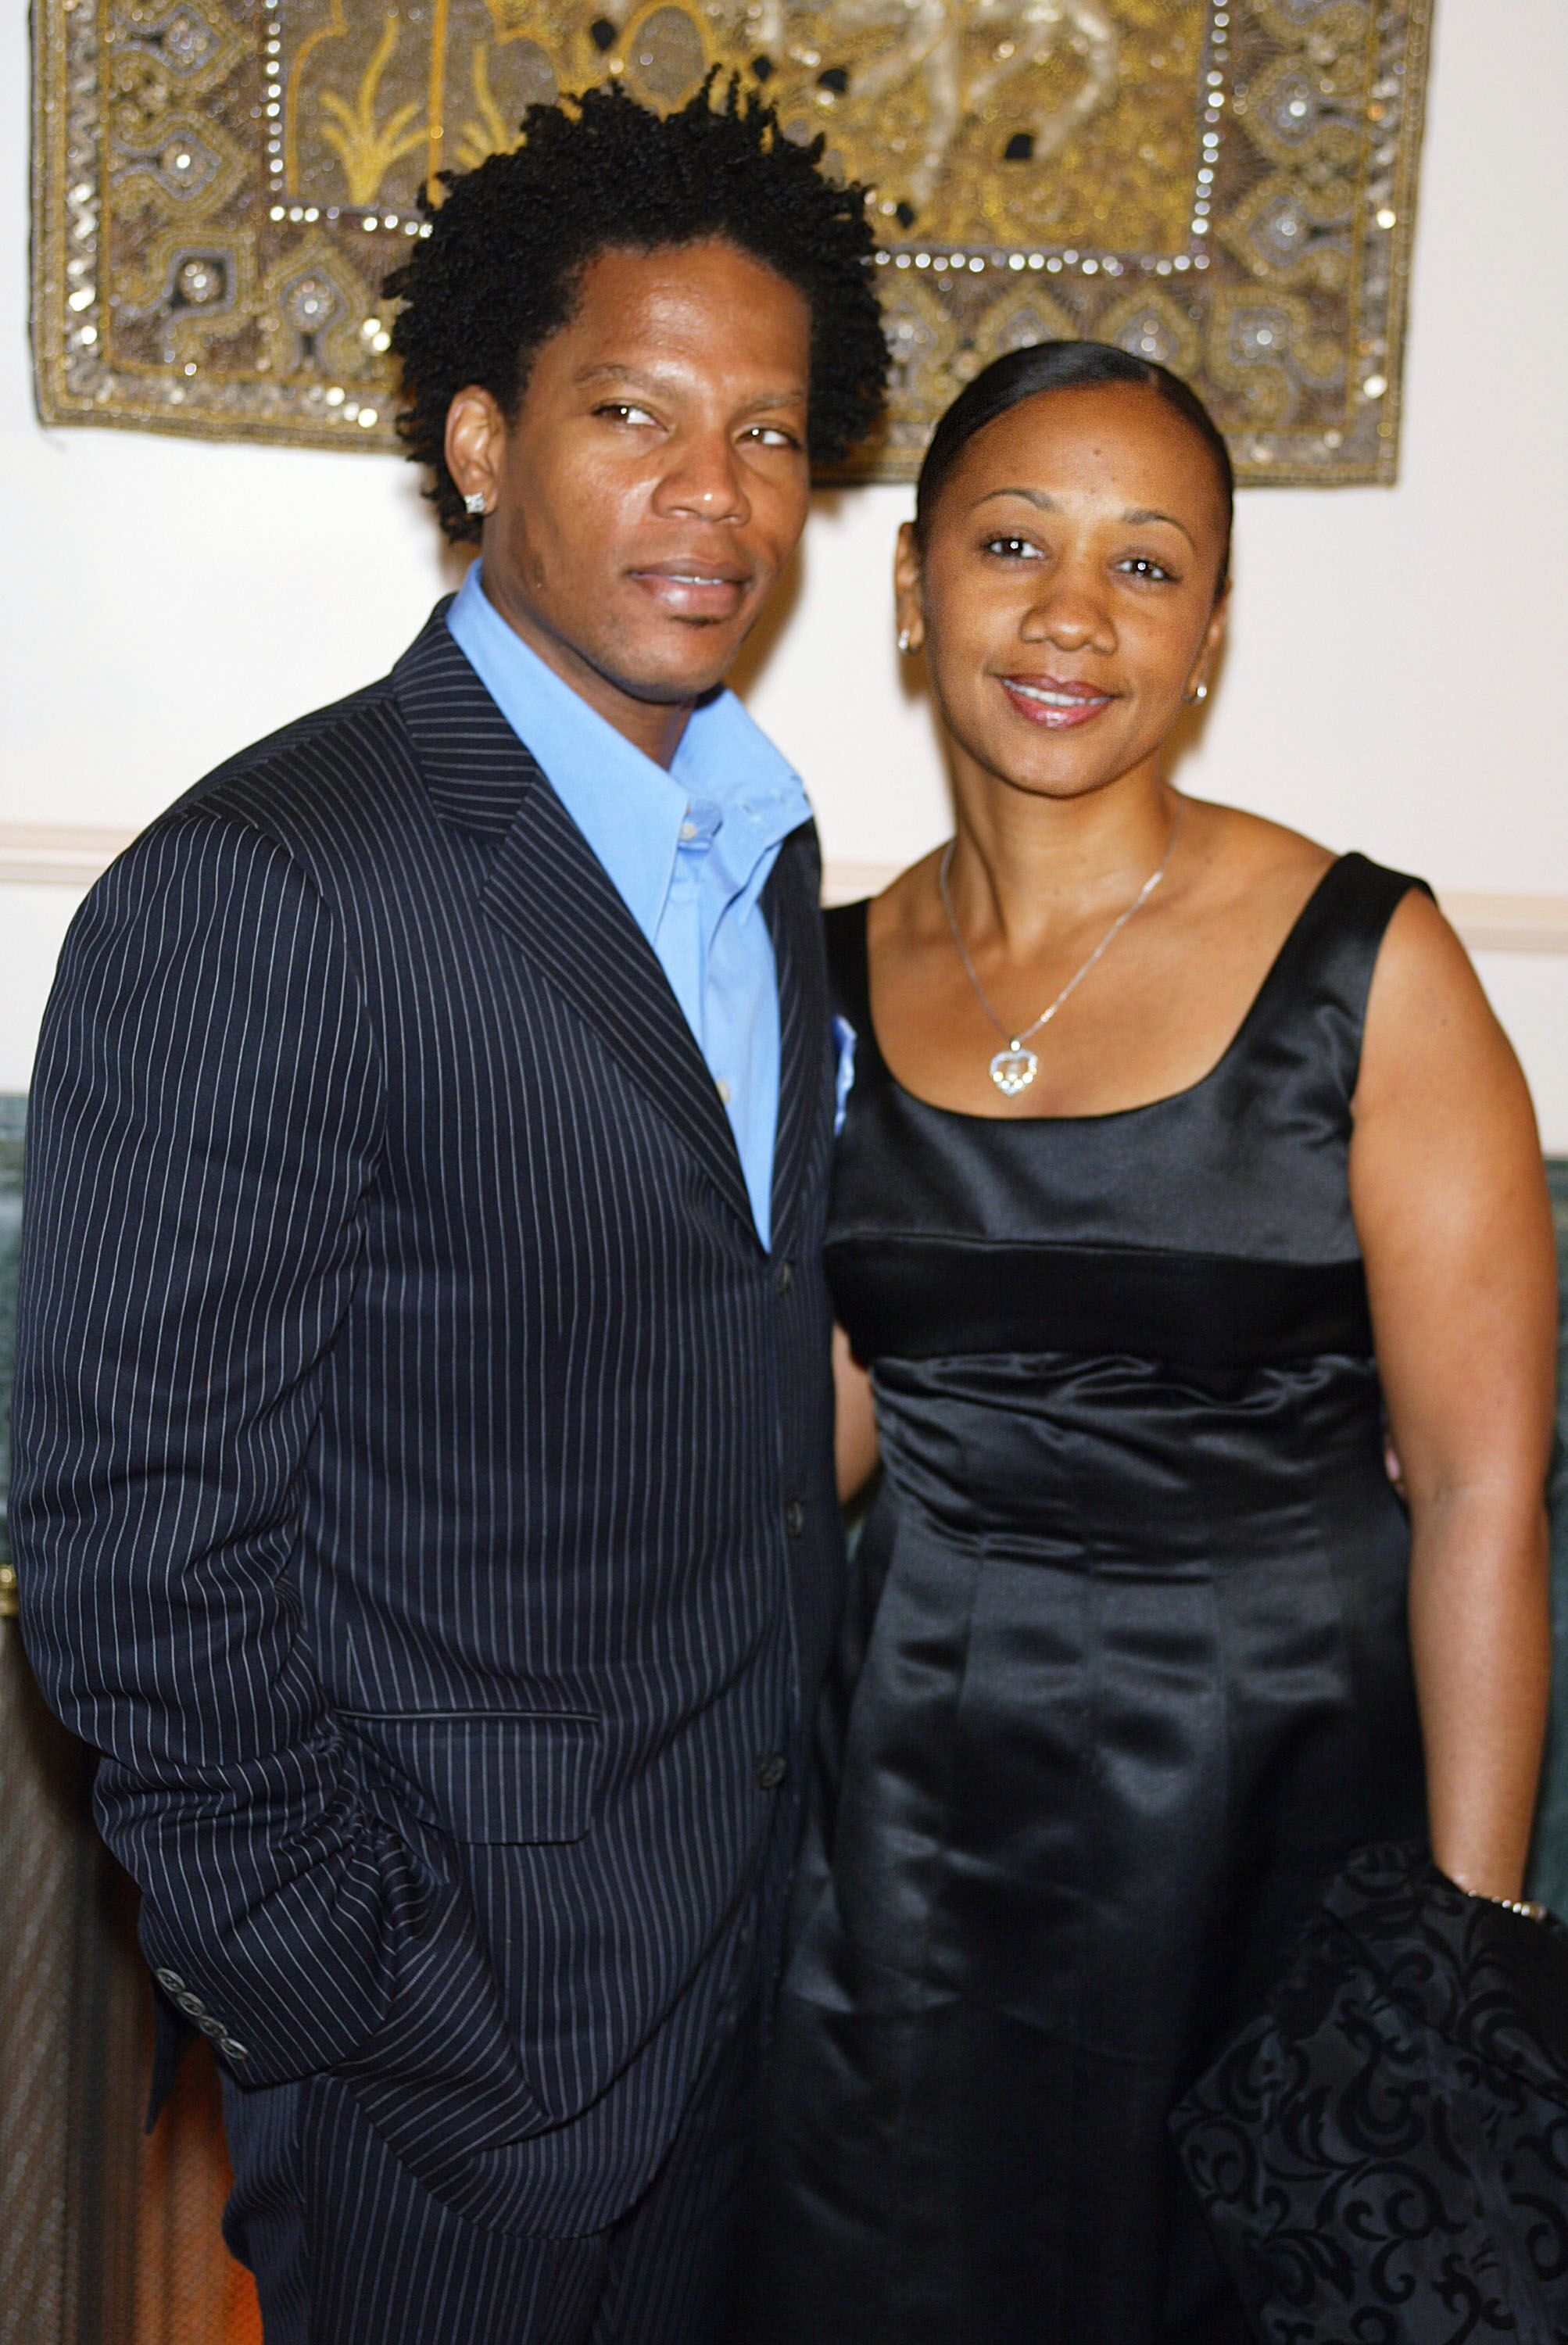  D.L. Hughley and his wife LaDonna pose at "Night of the Butterfly", hosted by Chrysalis, at a private residence on March 20, 2003 in Los Angeles | Source: Getty Images 